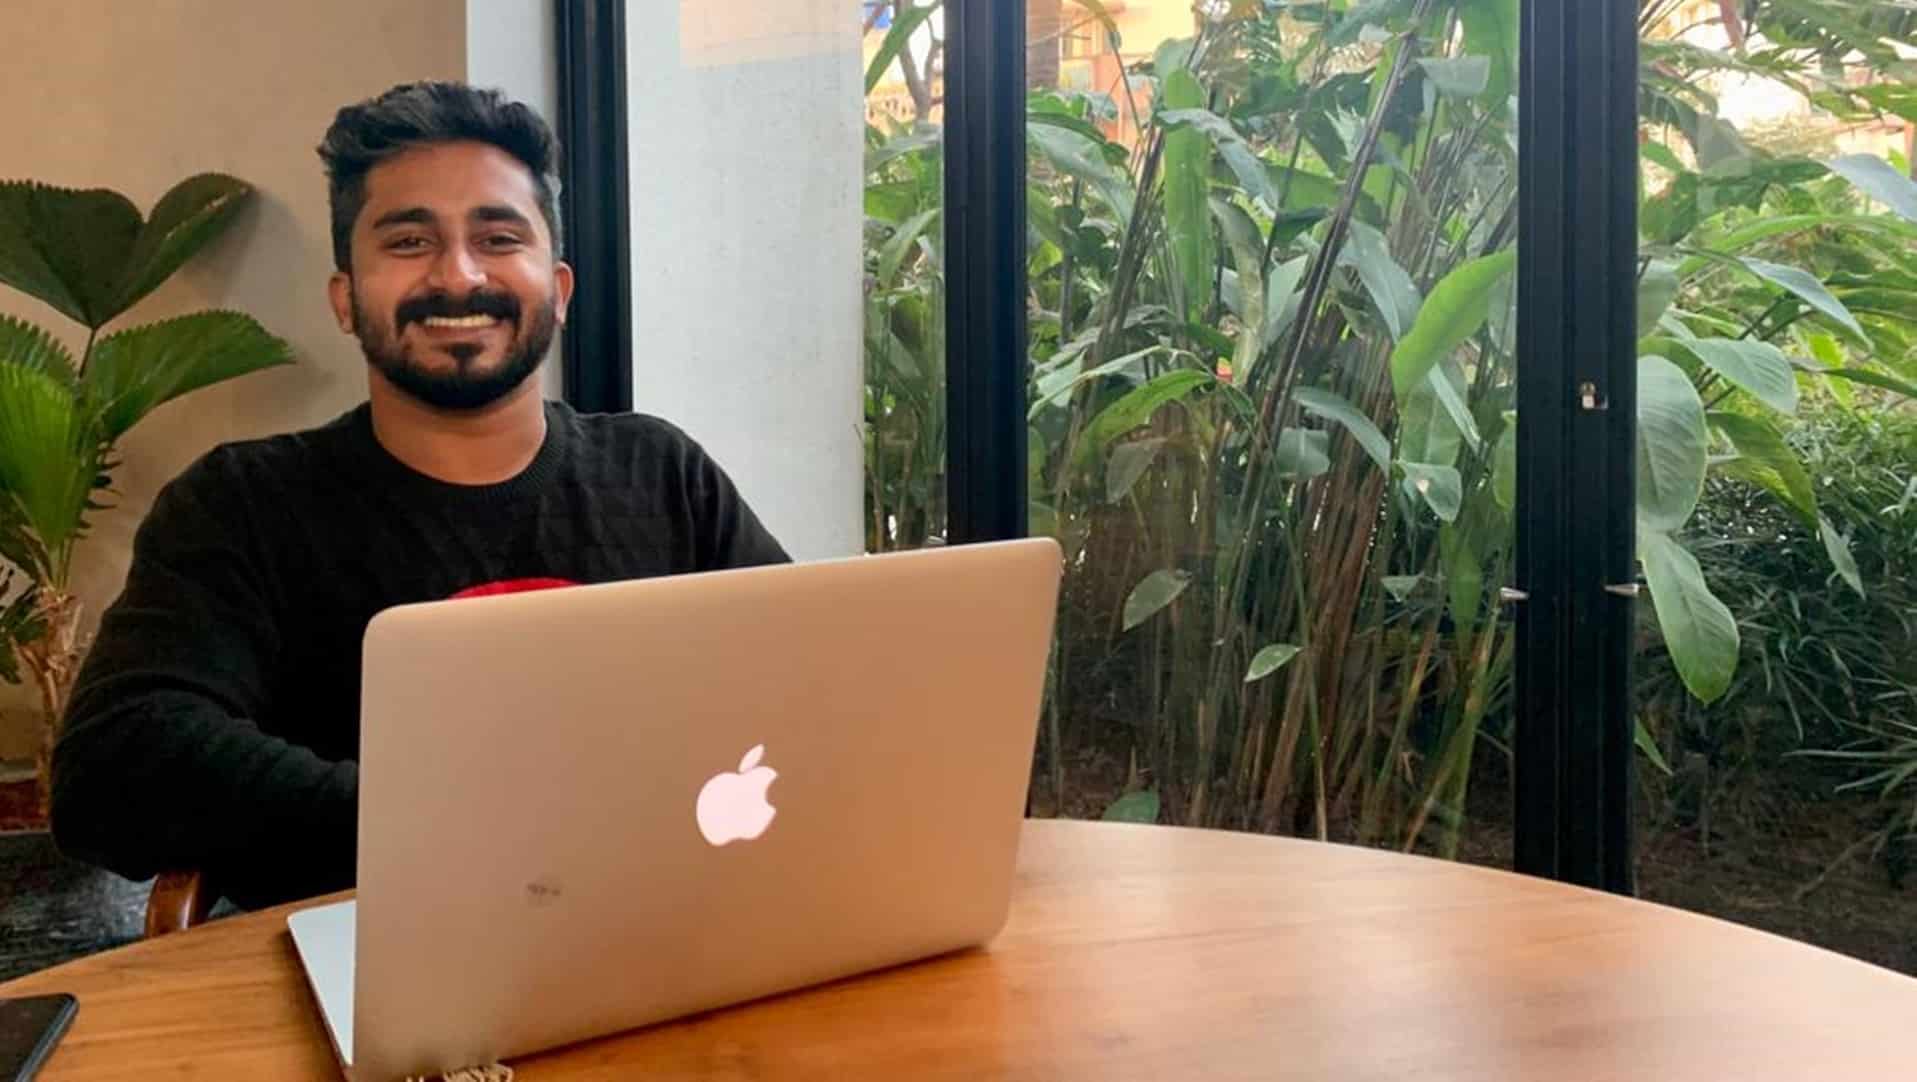 Digital learning was a privilege before pandemic: Akash Pillai